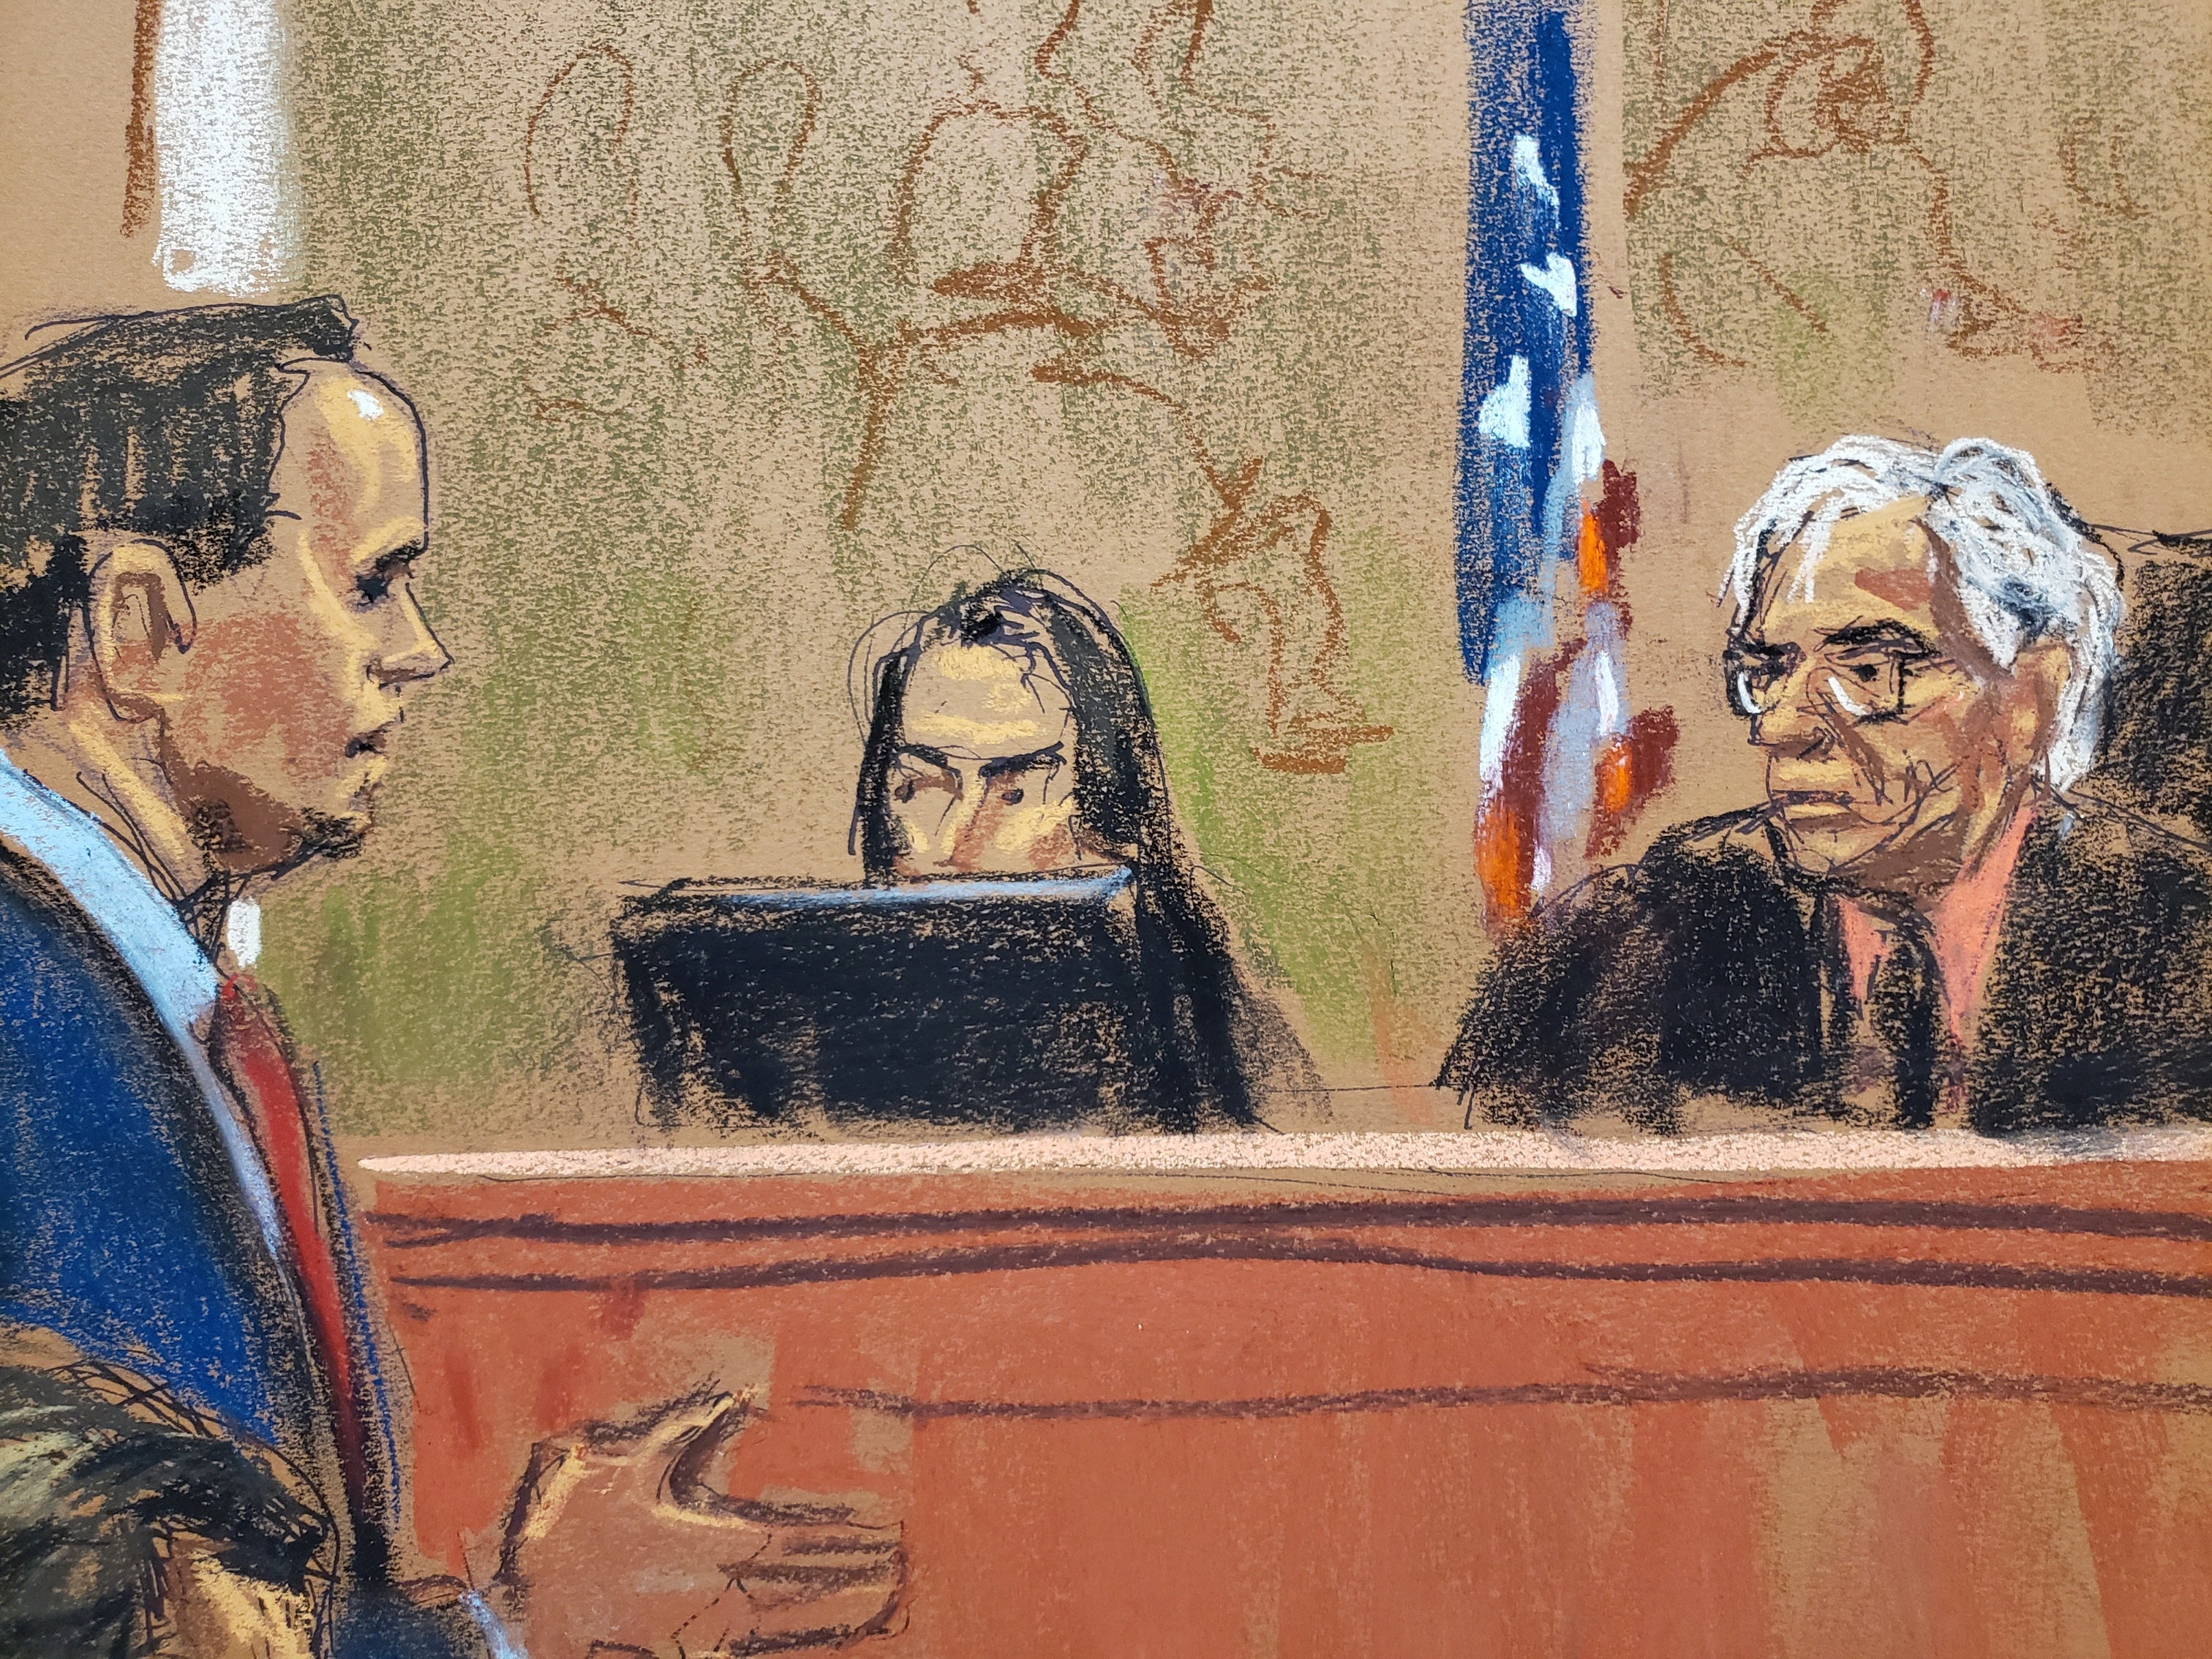 A courtroom sketch depicts Donald Trump’s attorney Christopher Kise, left, speaking to New York Judge Arthur Engoron on 3 November